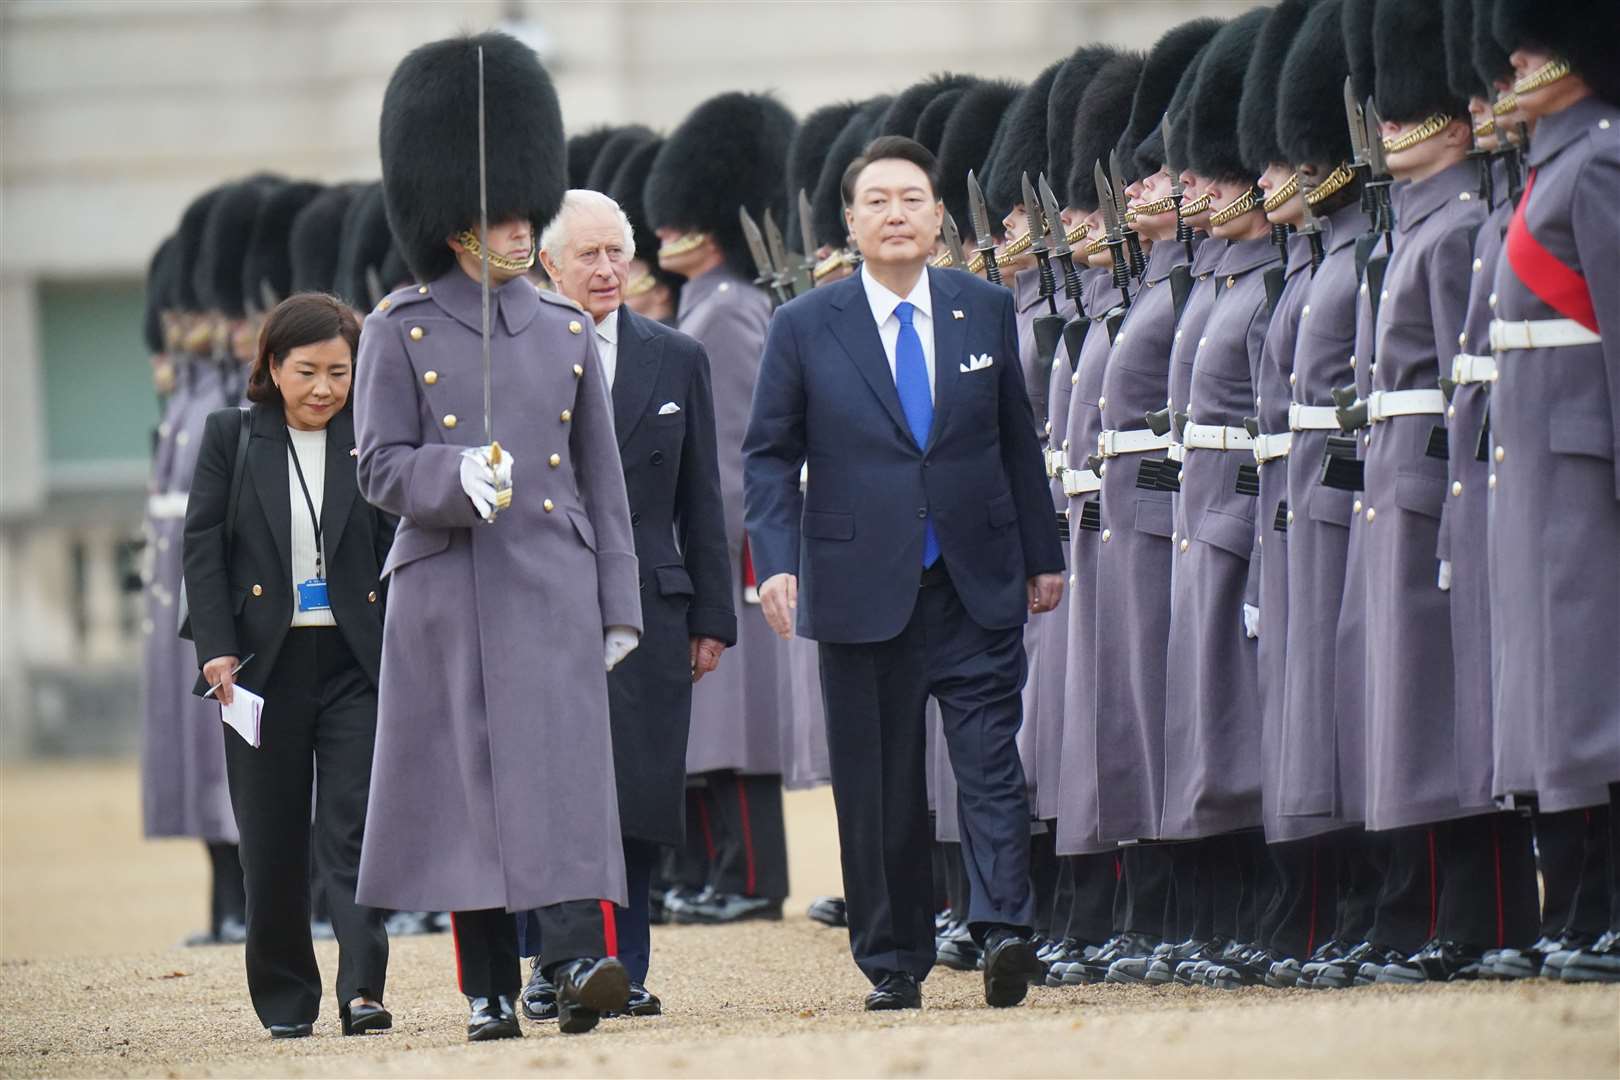 The King and President of South Korea, Yoon Suk Yeol, during the ceremonial welcome at Horse Guards Parade (Victoria Jones/PA)